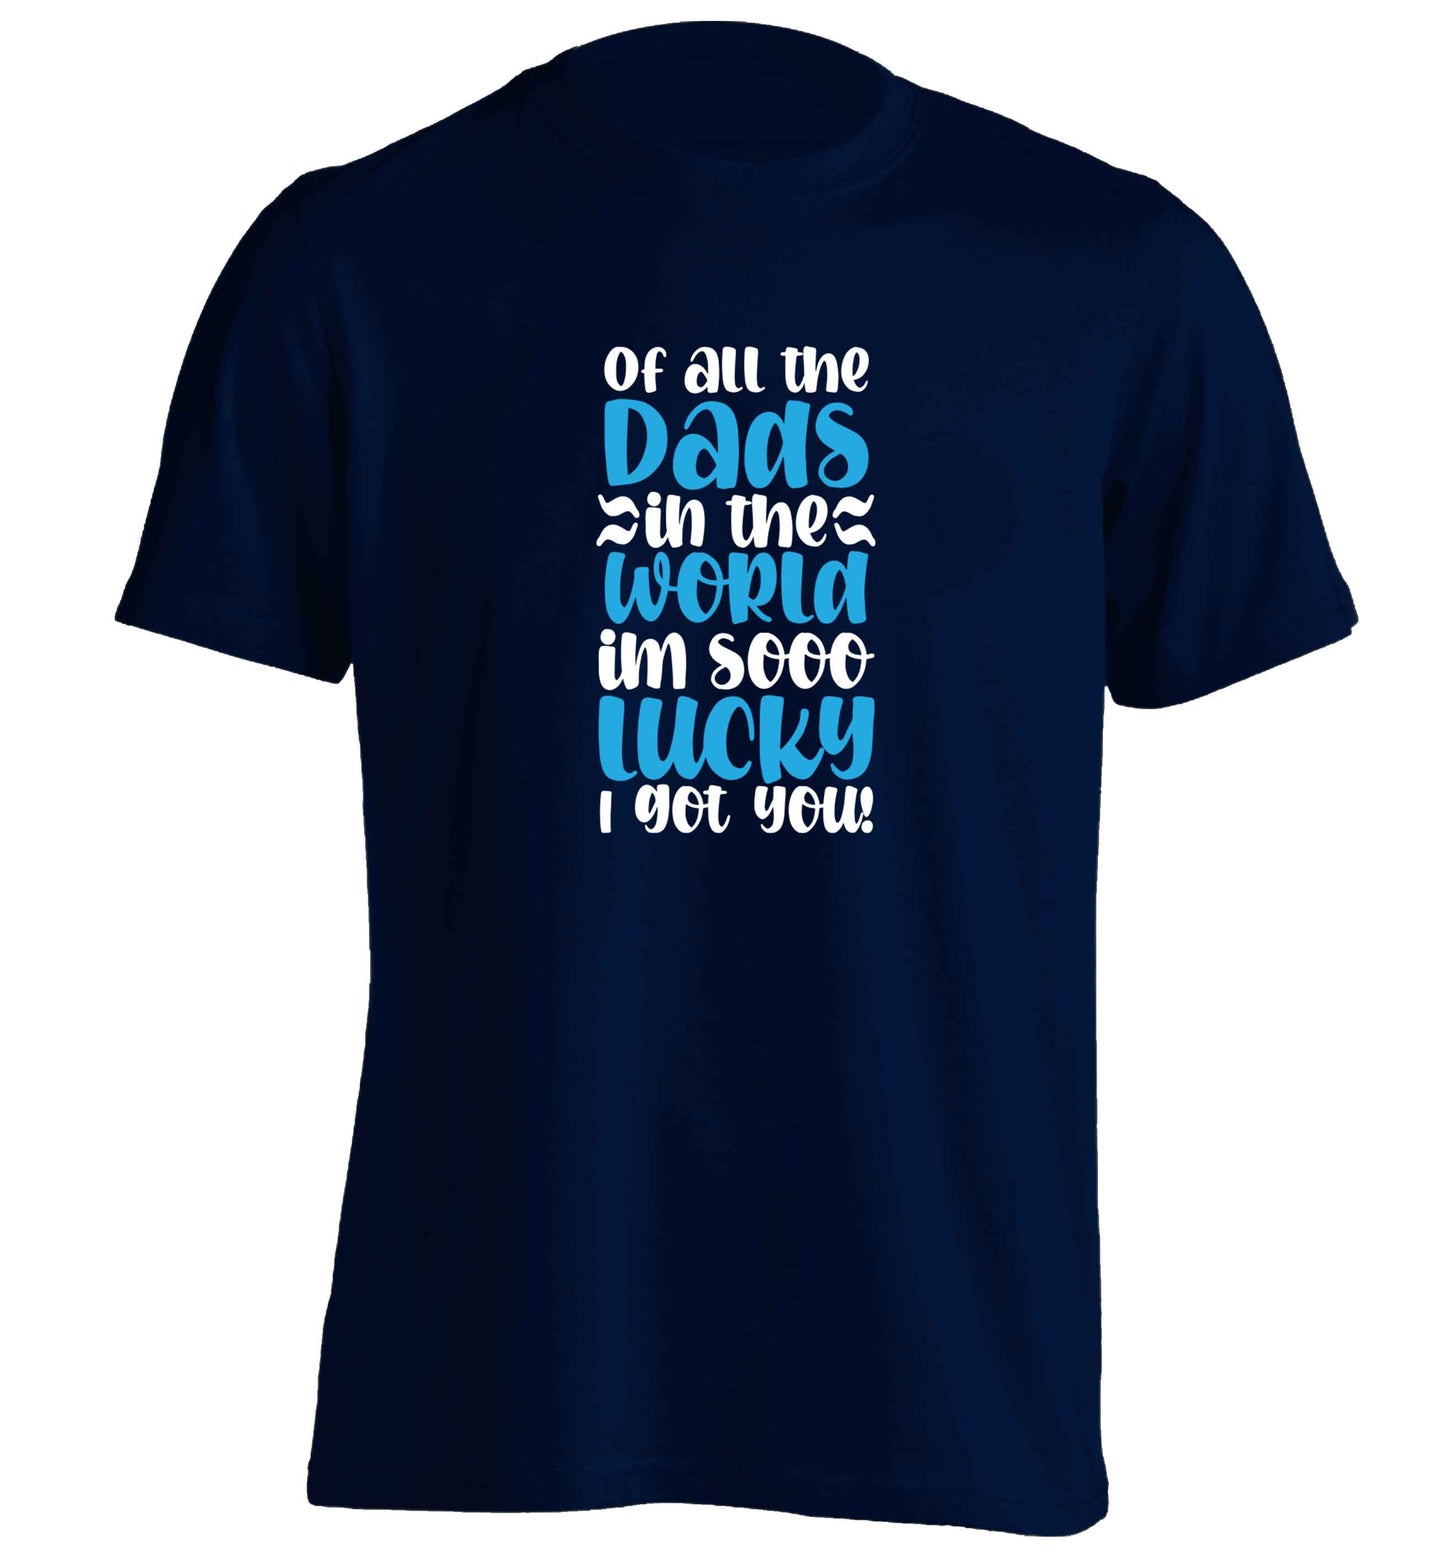 Of all the Dads in the world I'm so lucky I got you adults unisex navy Tshirt 2XL